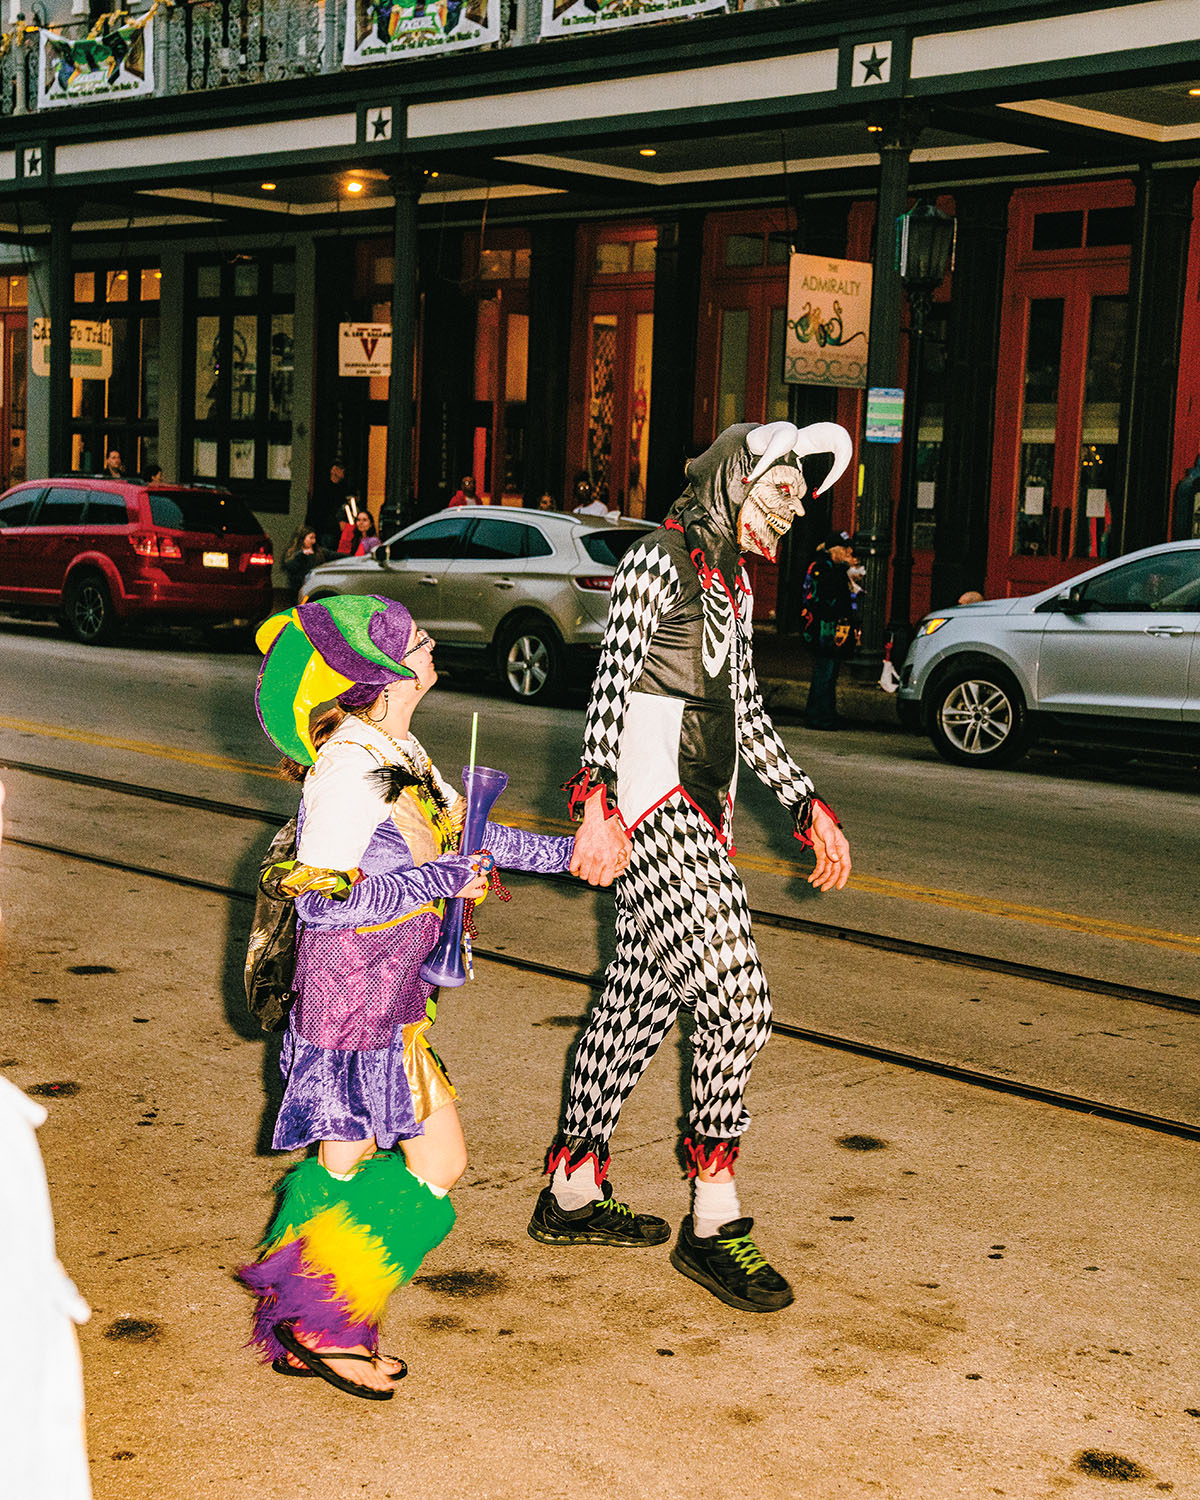 A person in a purple, green, and yellow jester costume walks next to a taller person in a black and white costume with a mask